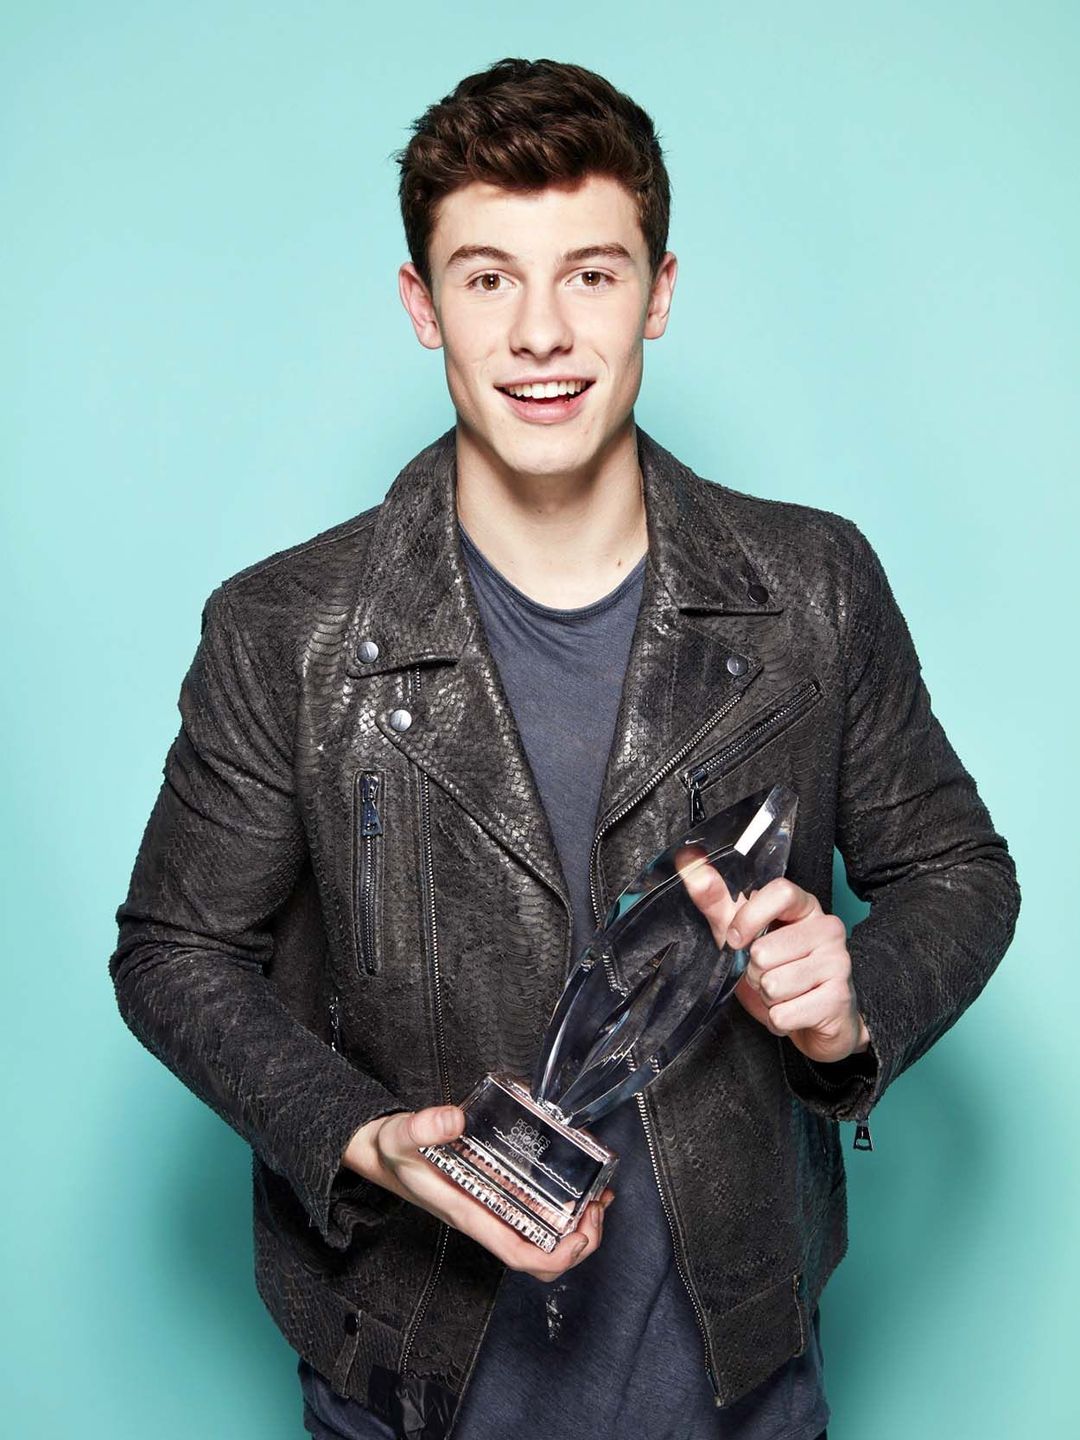 Shawn Mendes interesting facts